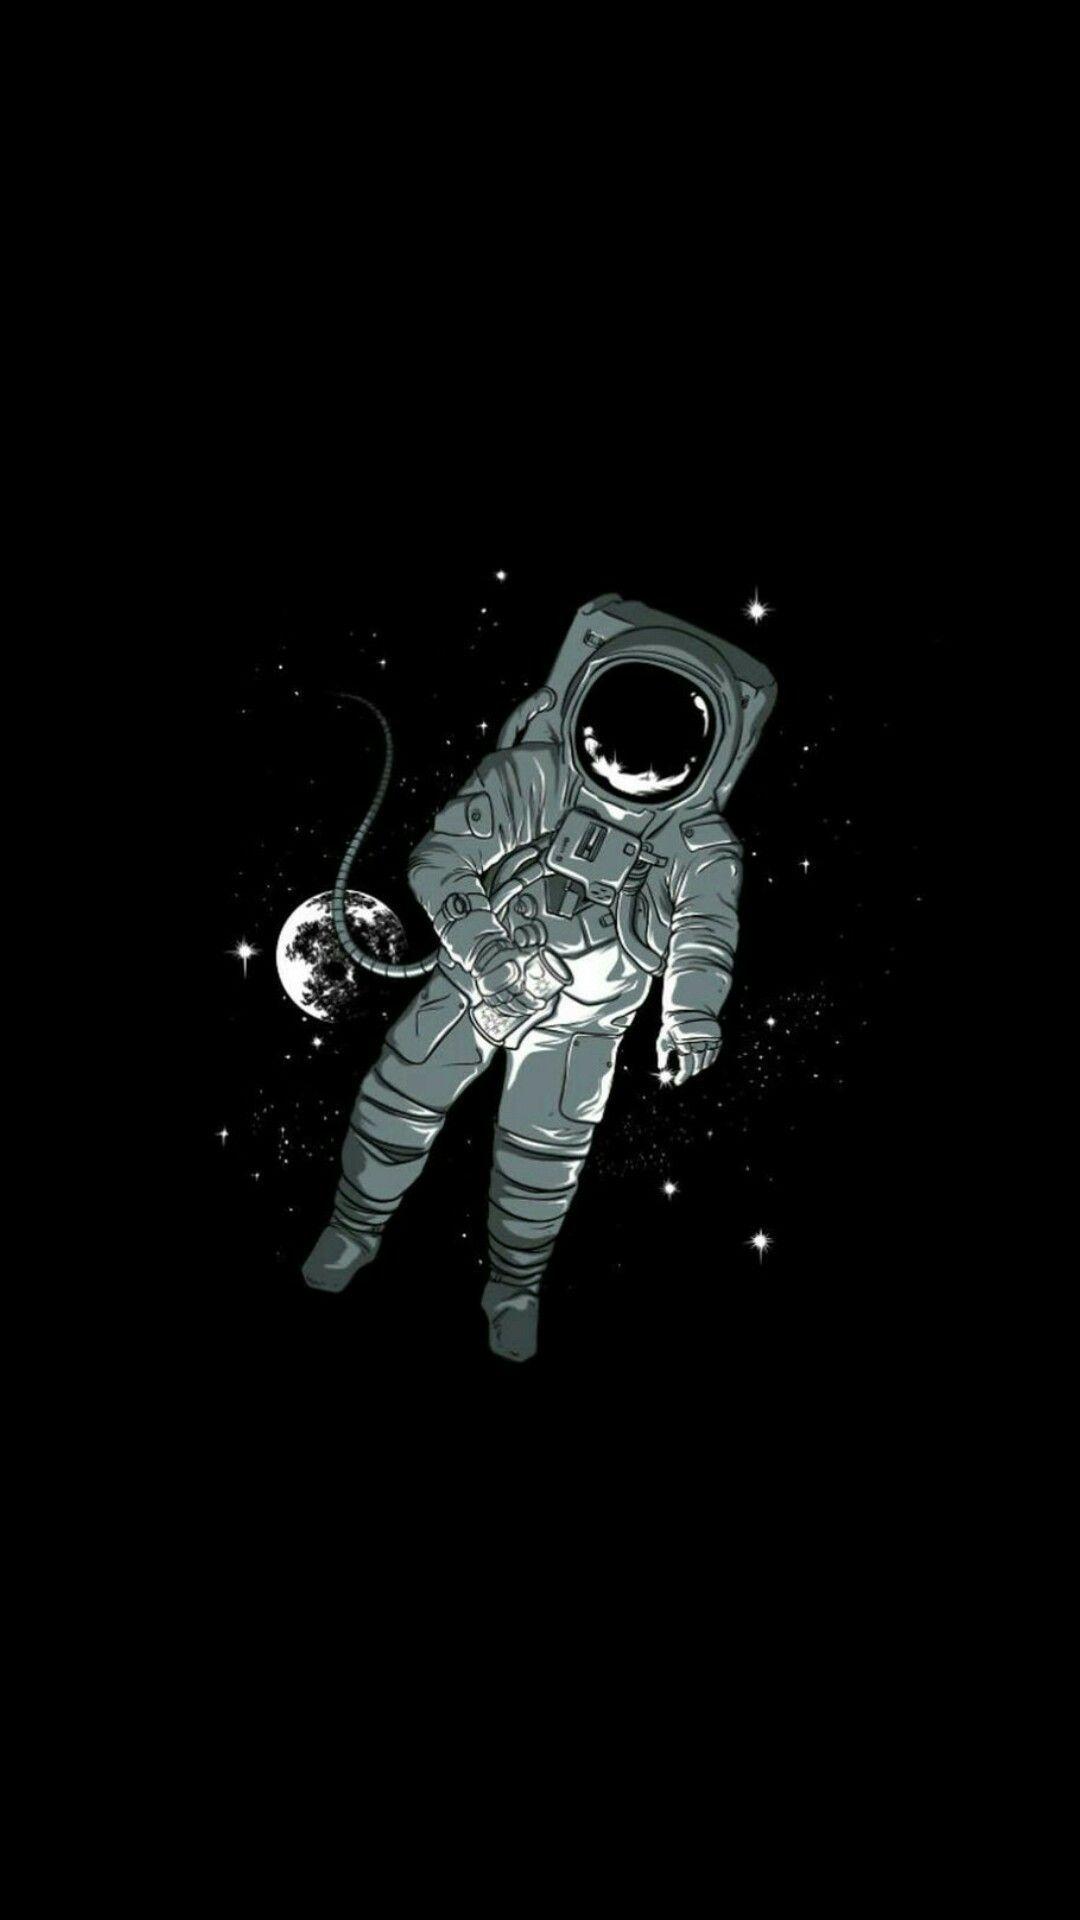 Astronaut Drawing Wallpapers - Top Free Astronaut Drawing Backgrounds ...